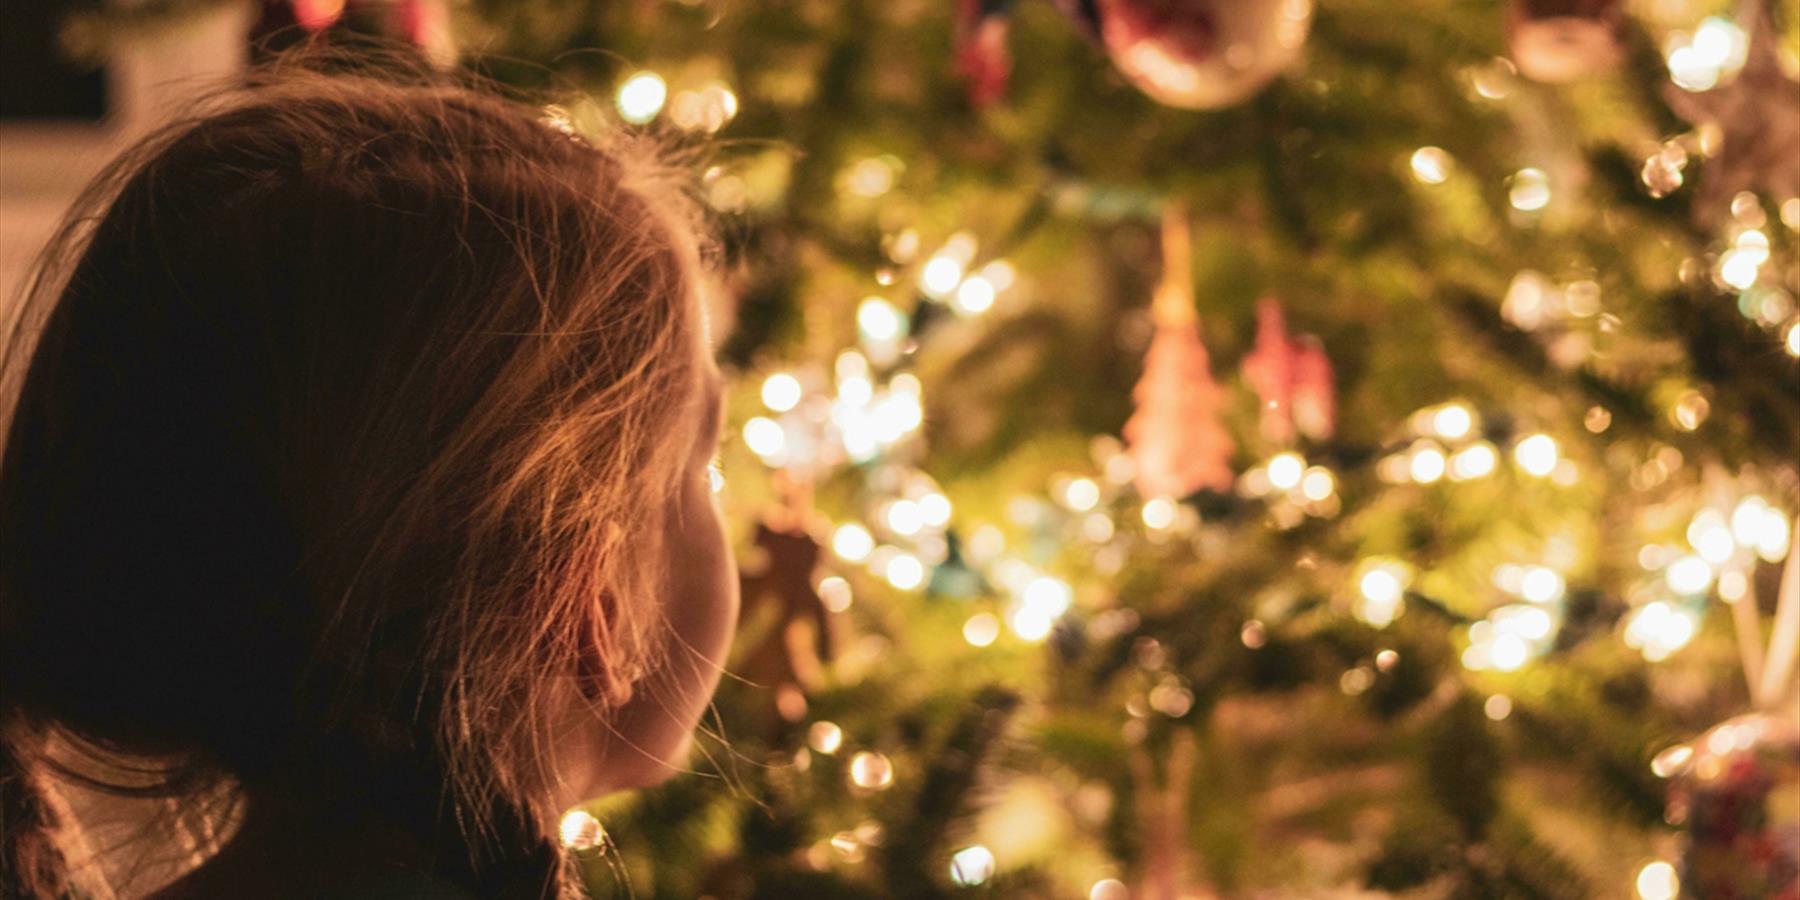 Young child looking at large indoor Christmas tree